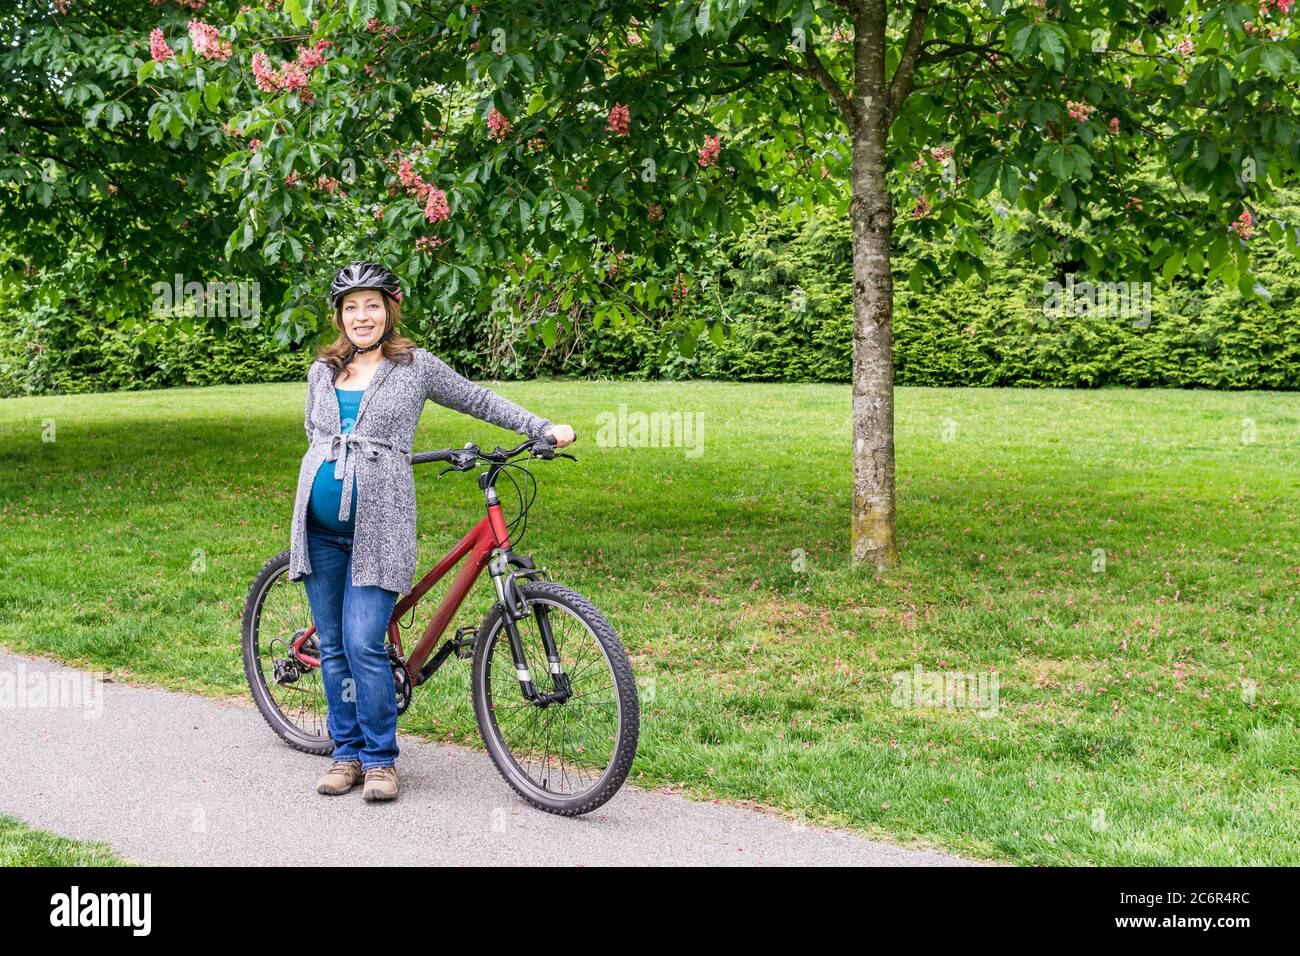 pregnant woman on the green lawn in a park holding bicycle ready to ride. Stock Photo